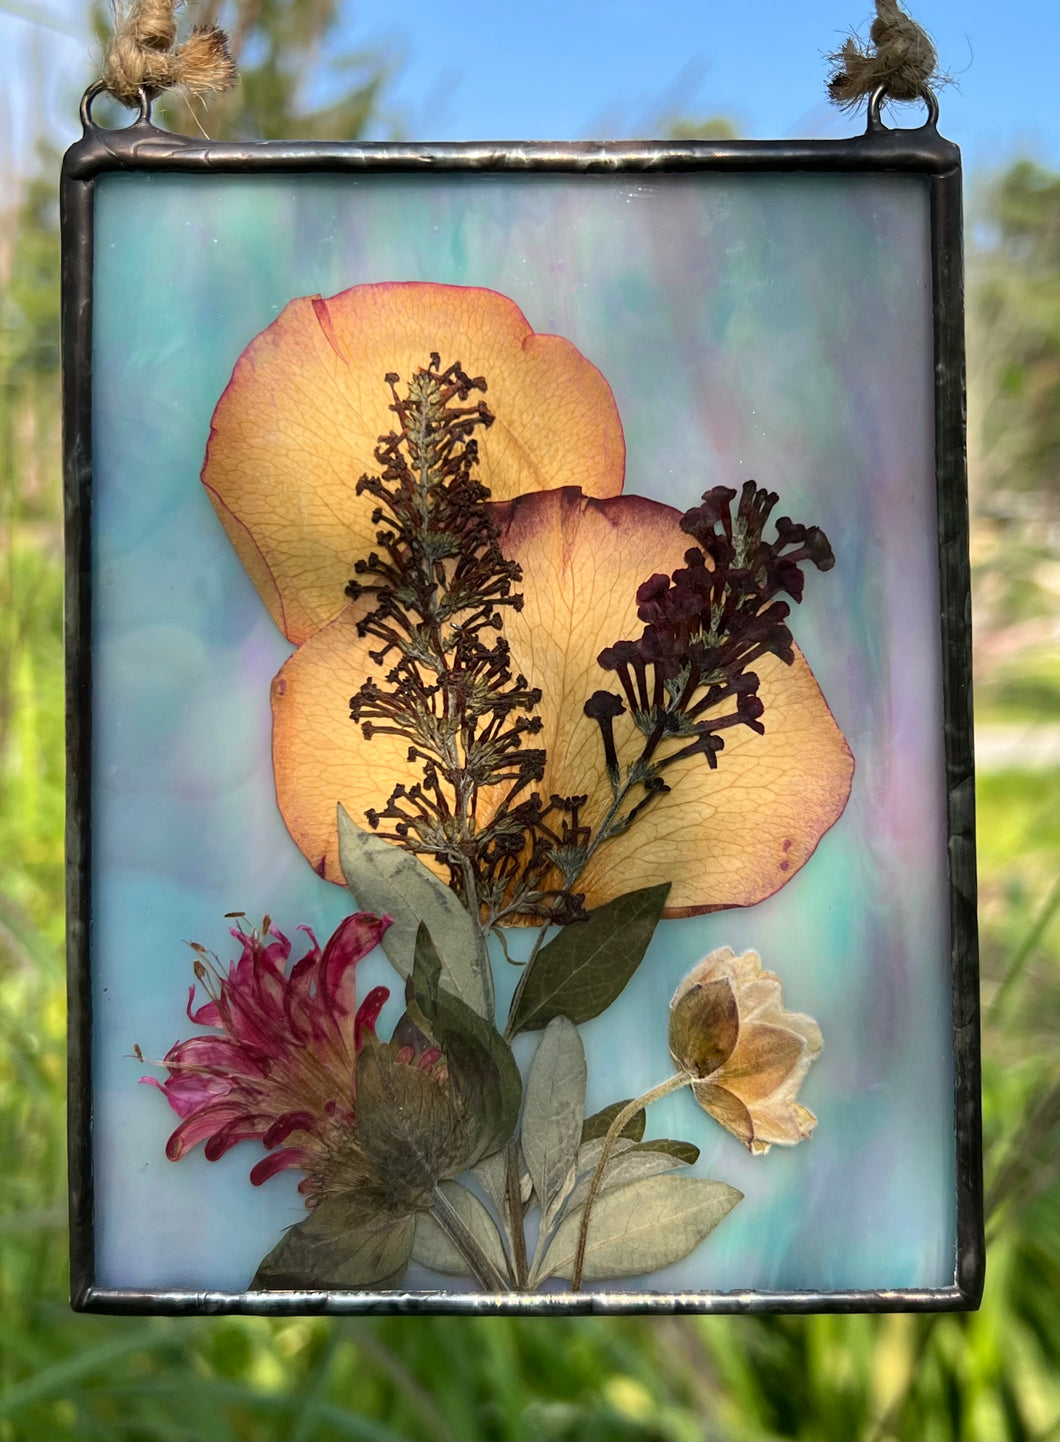 Pressed rose petals, butterfly bush, bee balm, and Japanese anemone bud with iridescent blue/pink/purple glass backing. Rectangle shape with hanging twine at top.